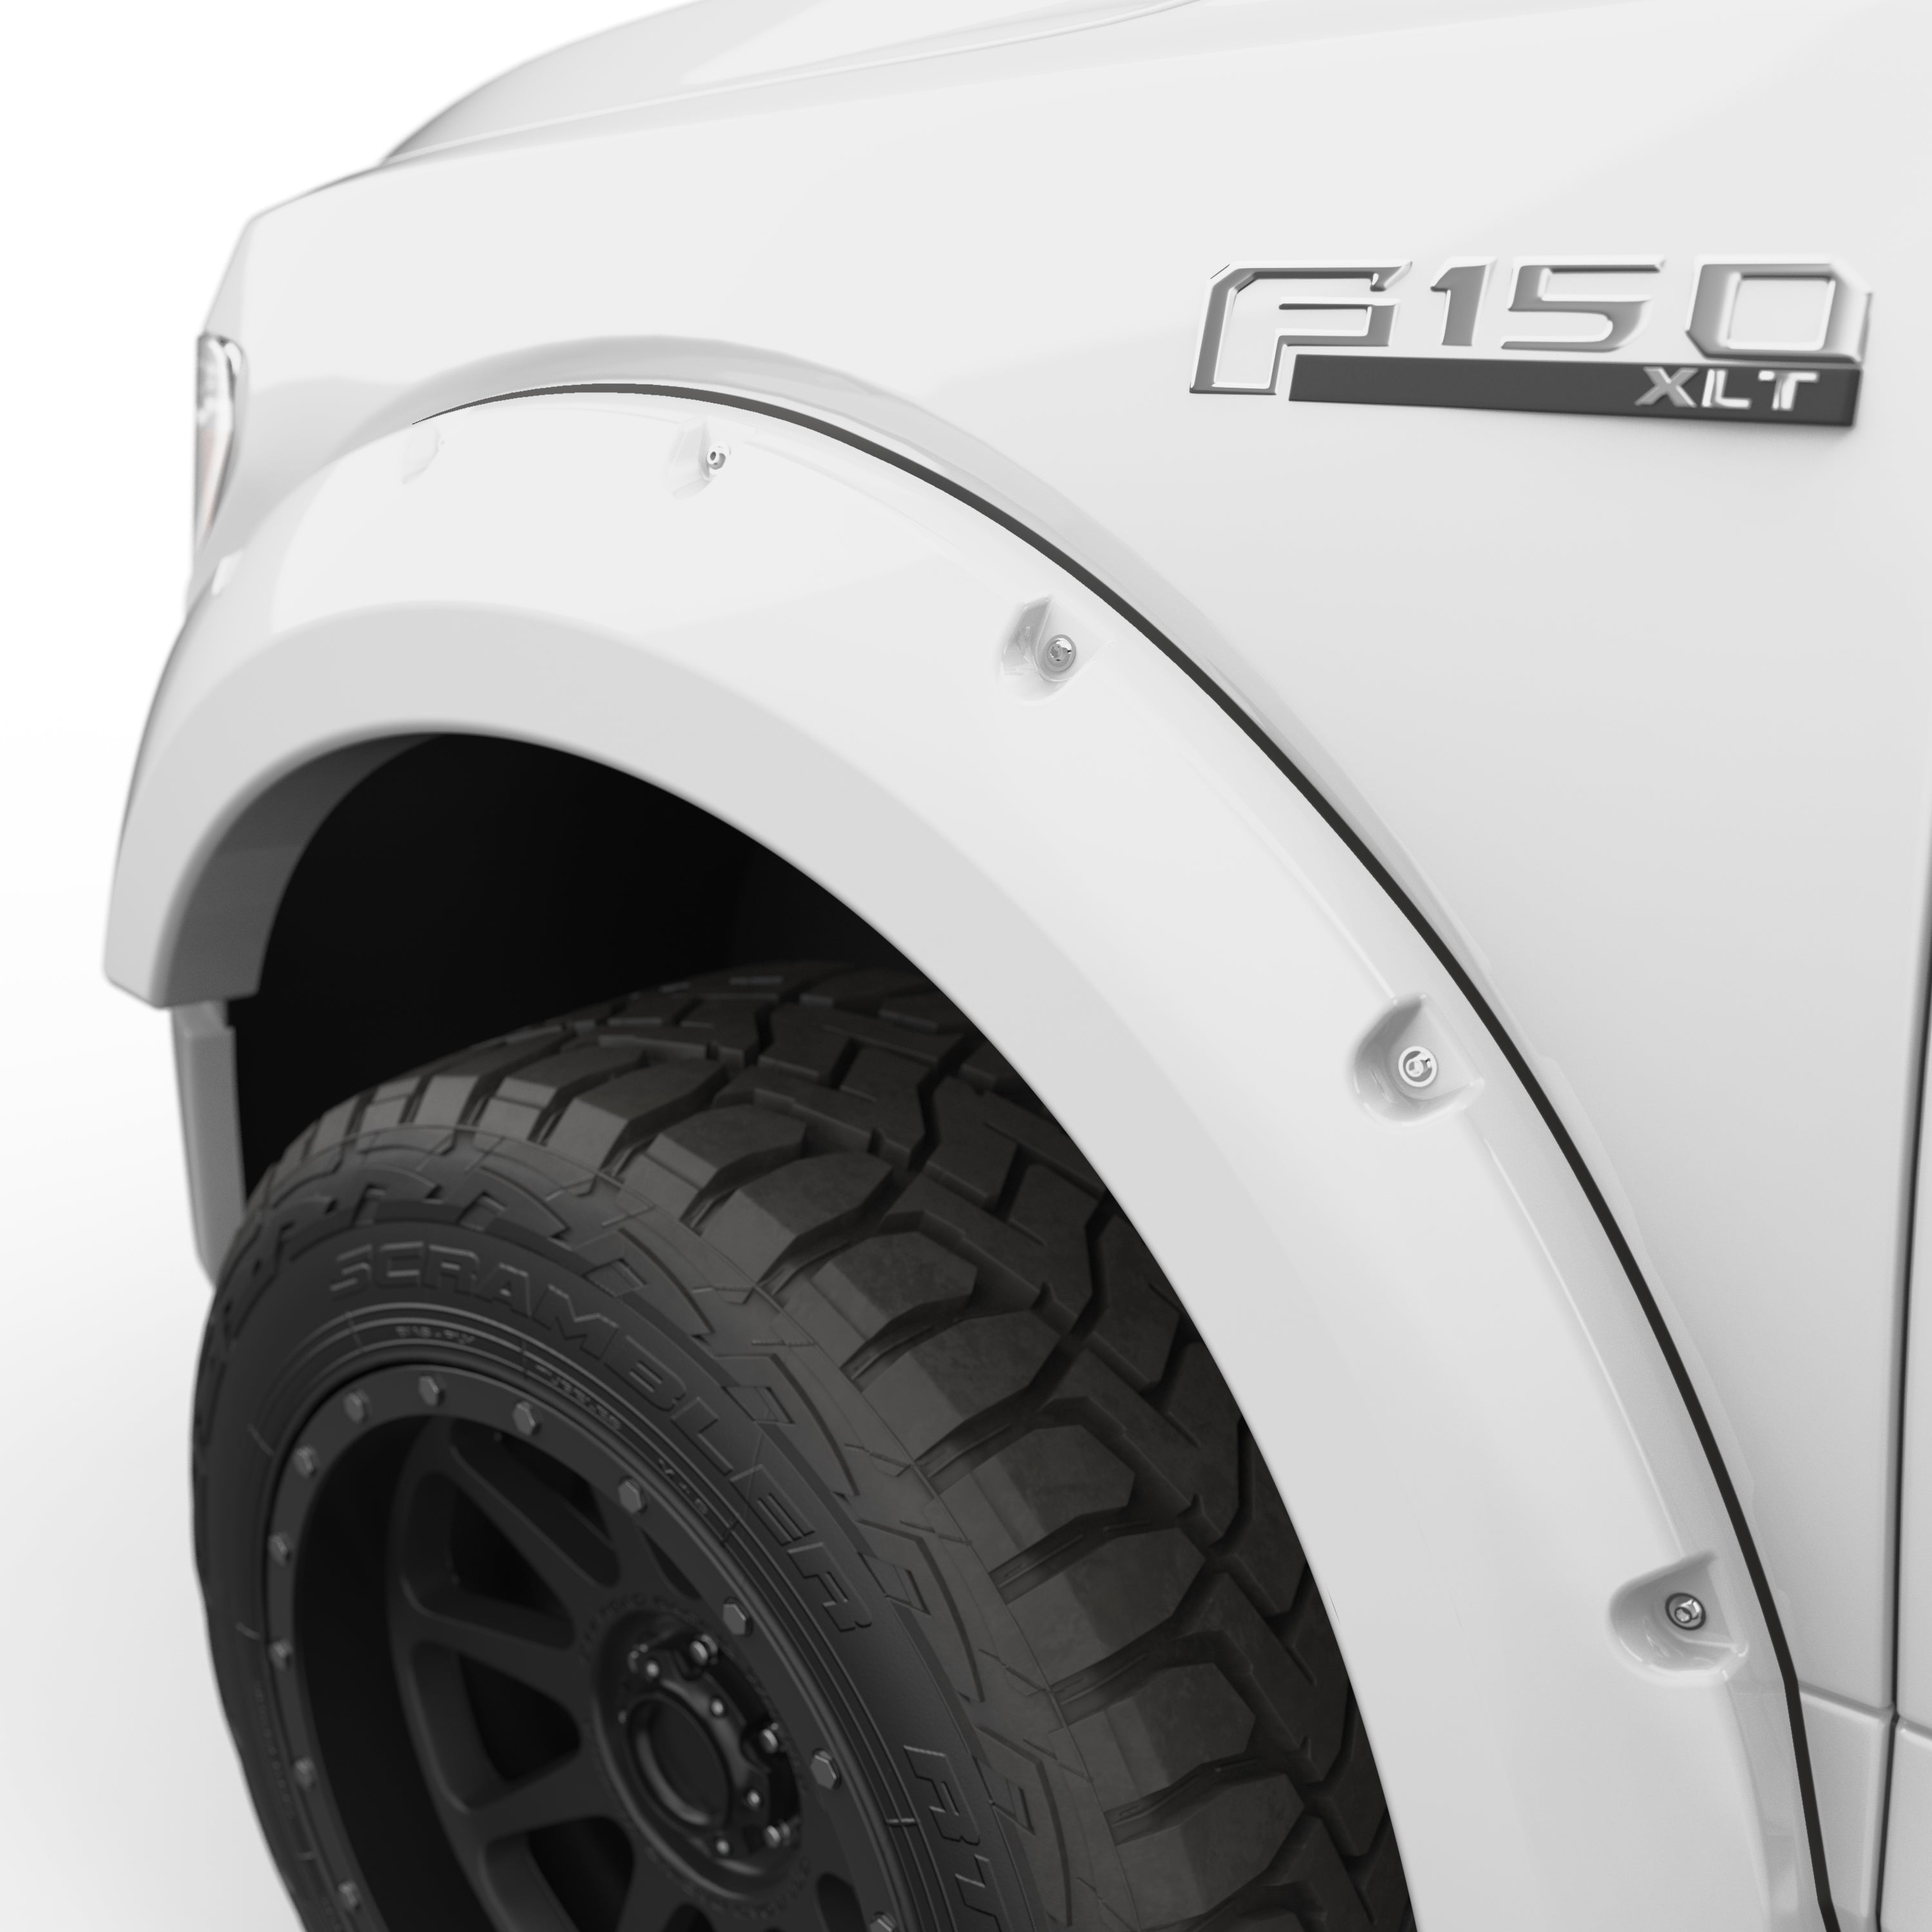 EGR 2018-2020 Ford F-150 2 & 4 Door Crew Cab Extended Cab Standard Cab Pickup Traditional Bolt-on look Fender Flares set of 4 Painted to Code Oxford White 793574-Z1